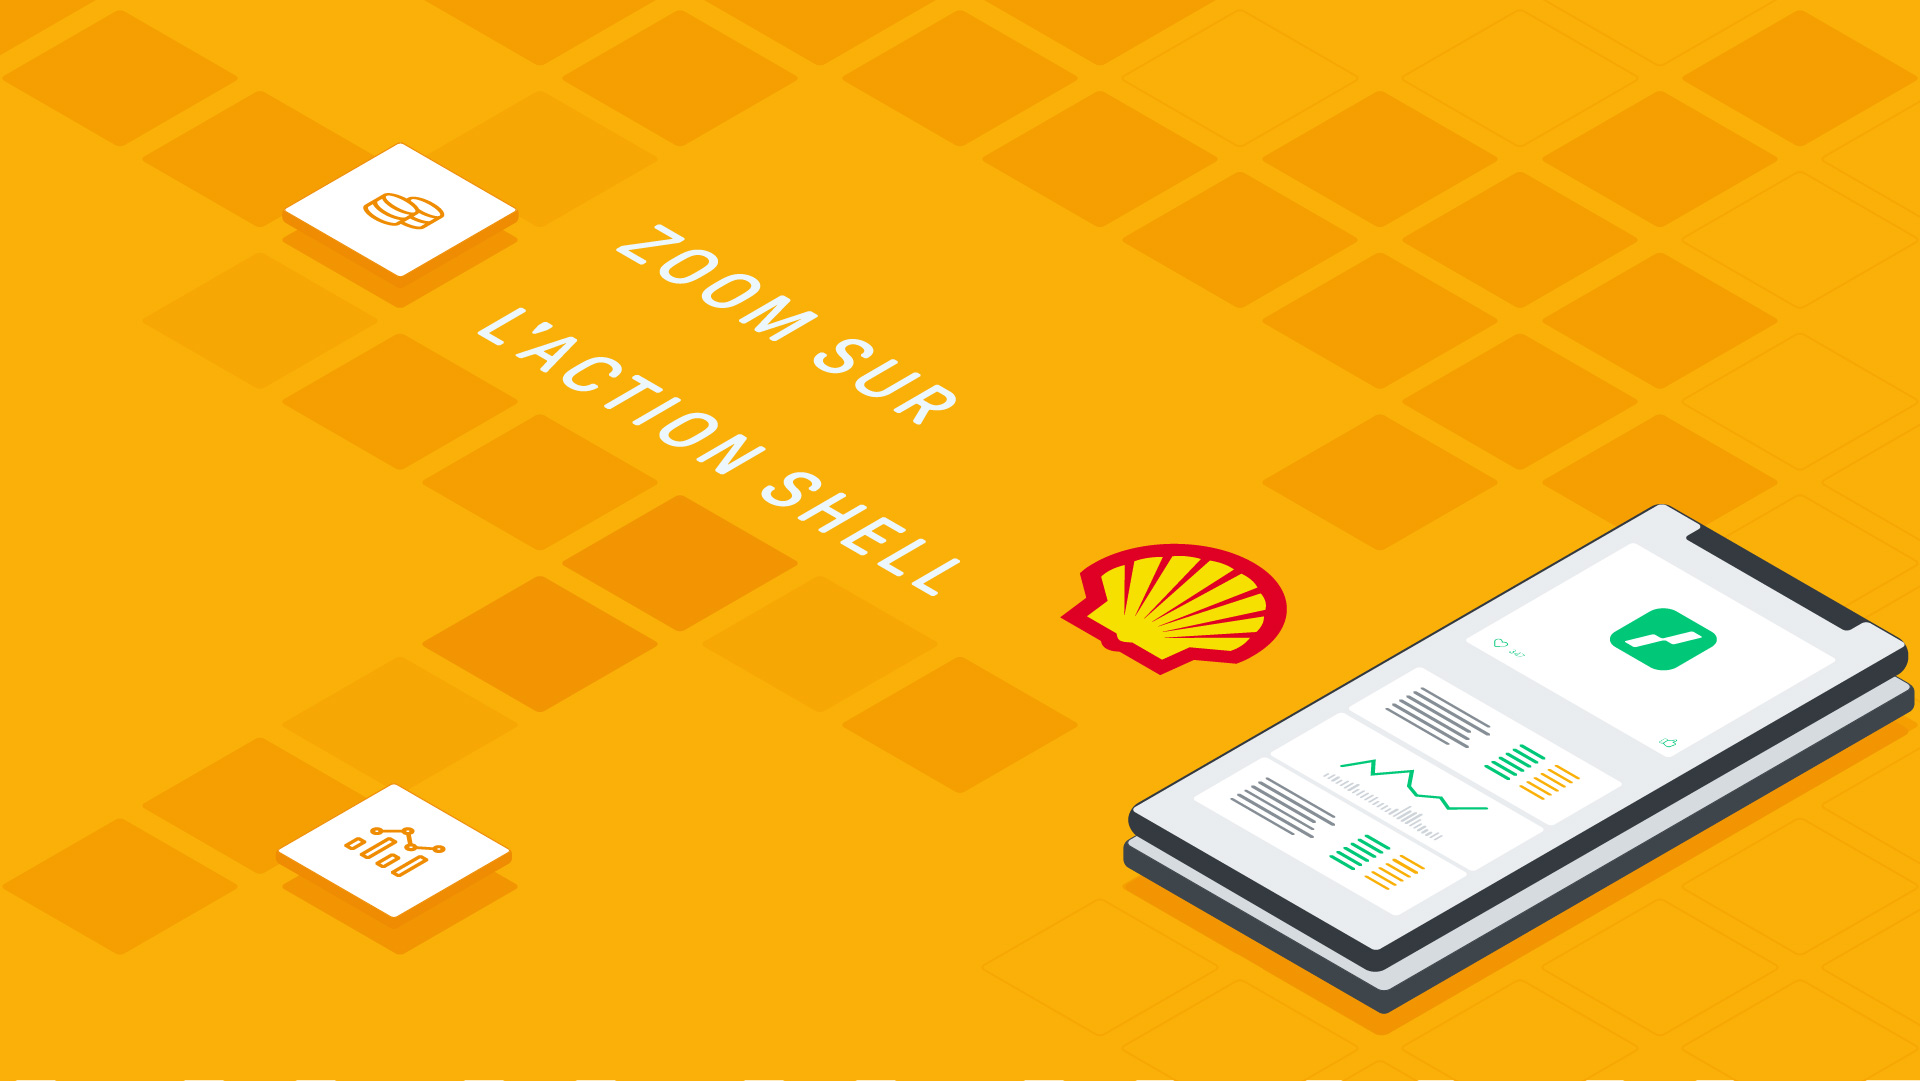 cours action shell - shell cours de l'action - illustration logo shell application trading